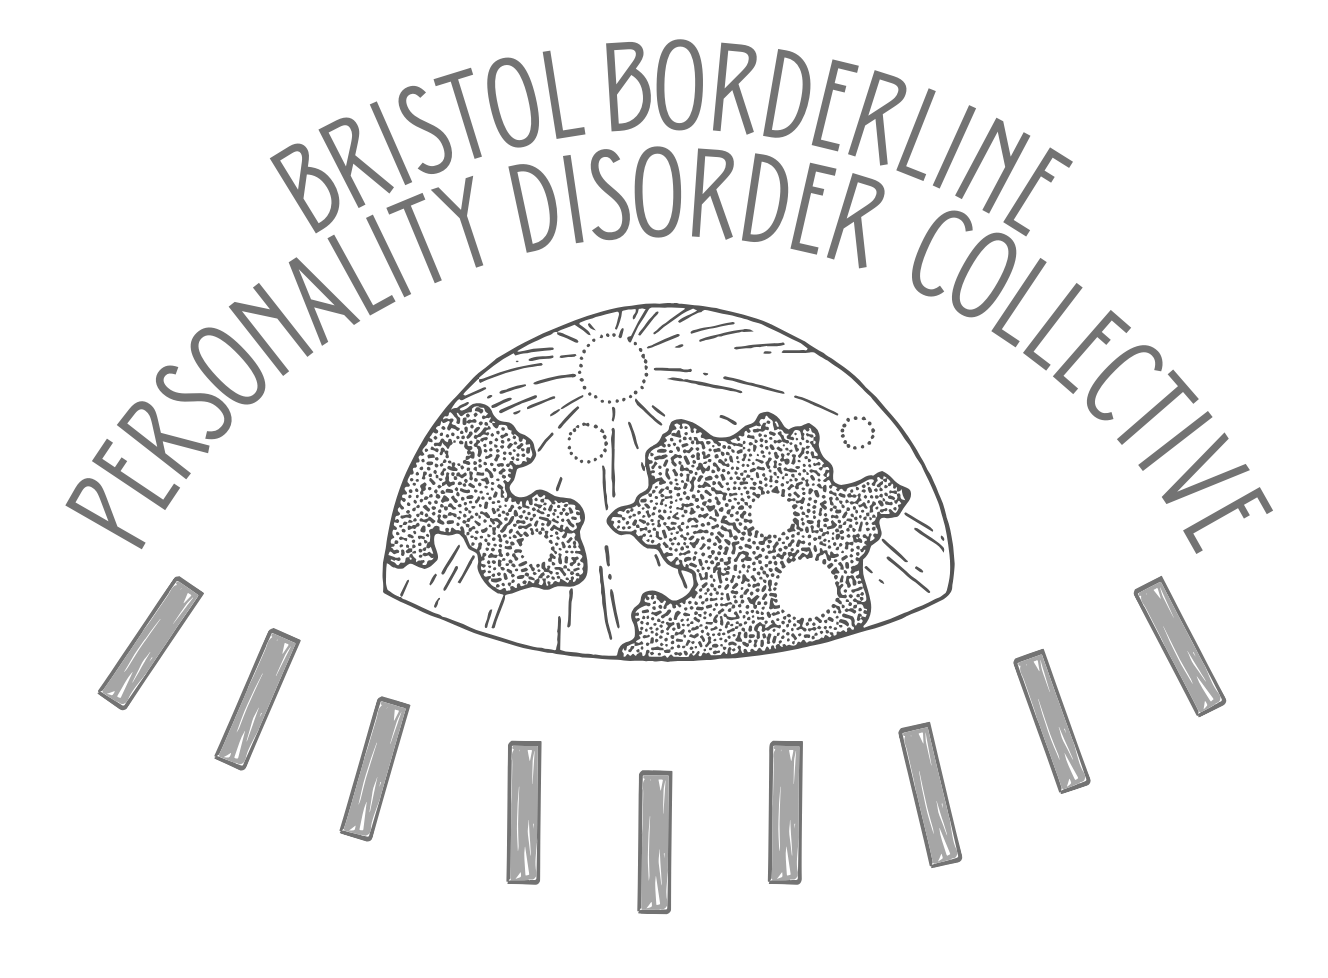 Borderline Personality Disorder Collective